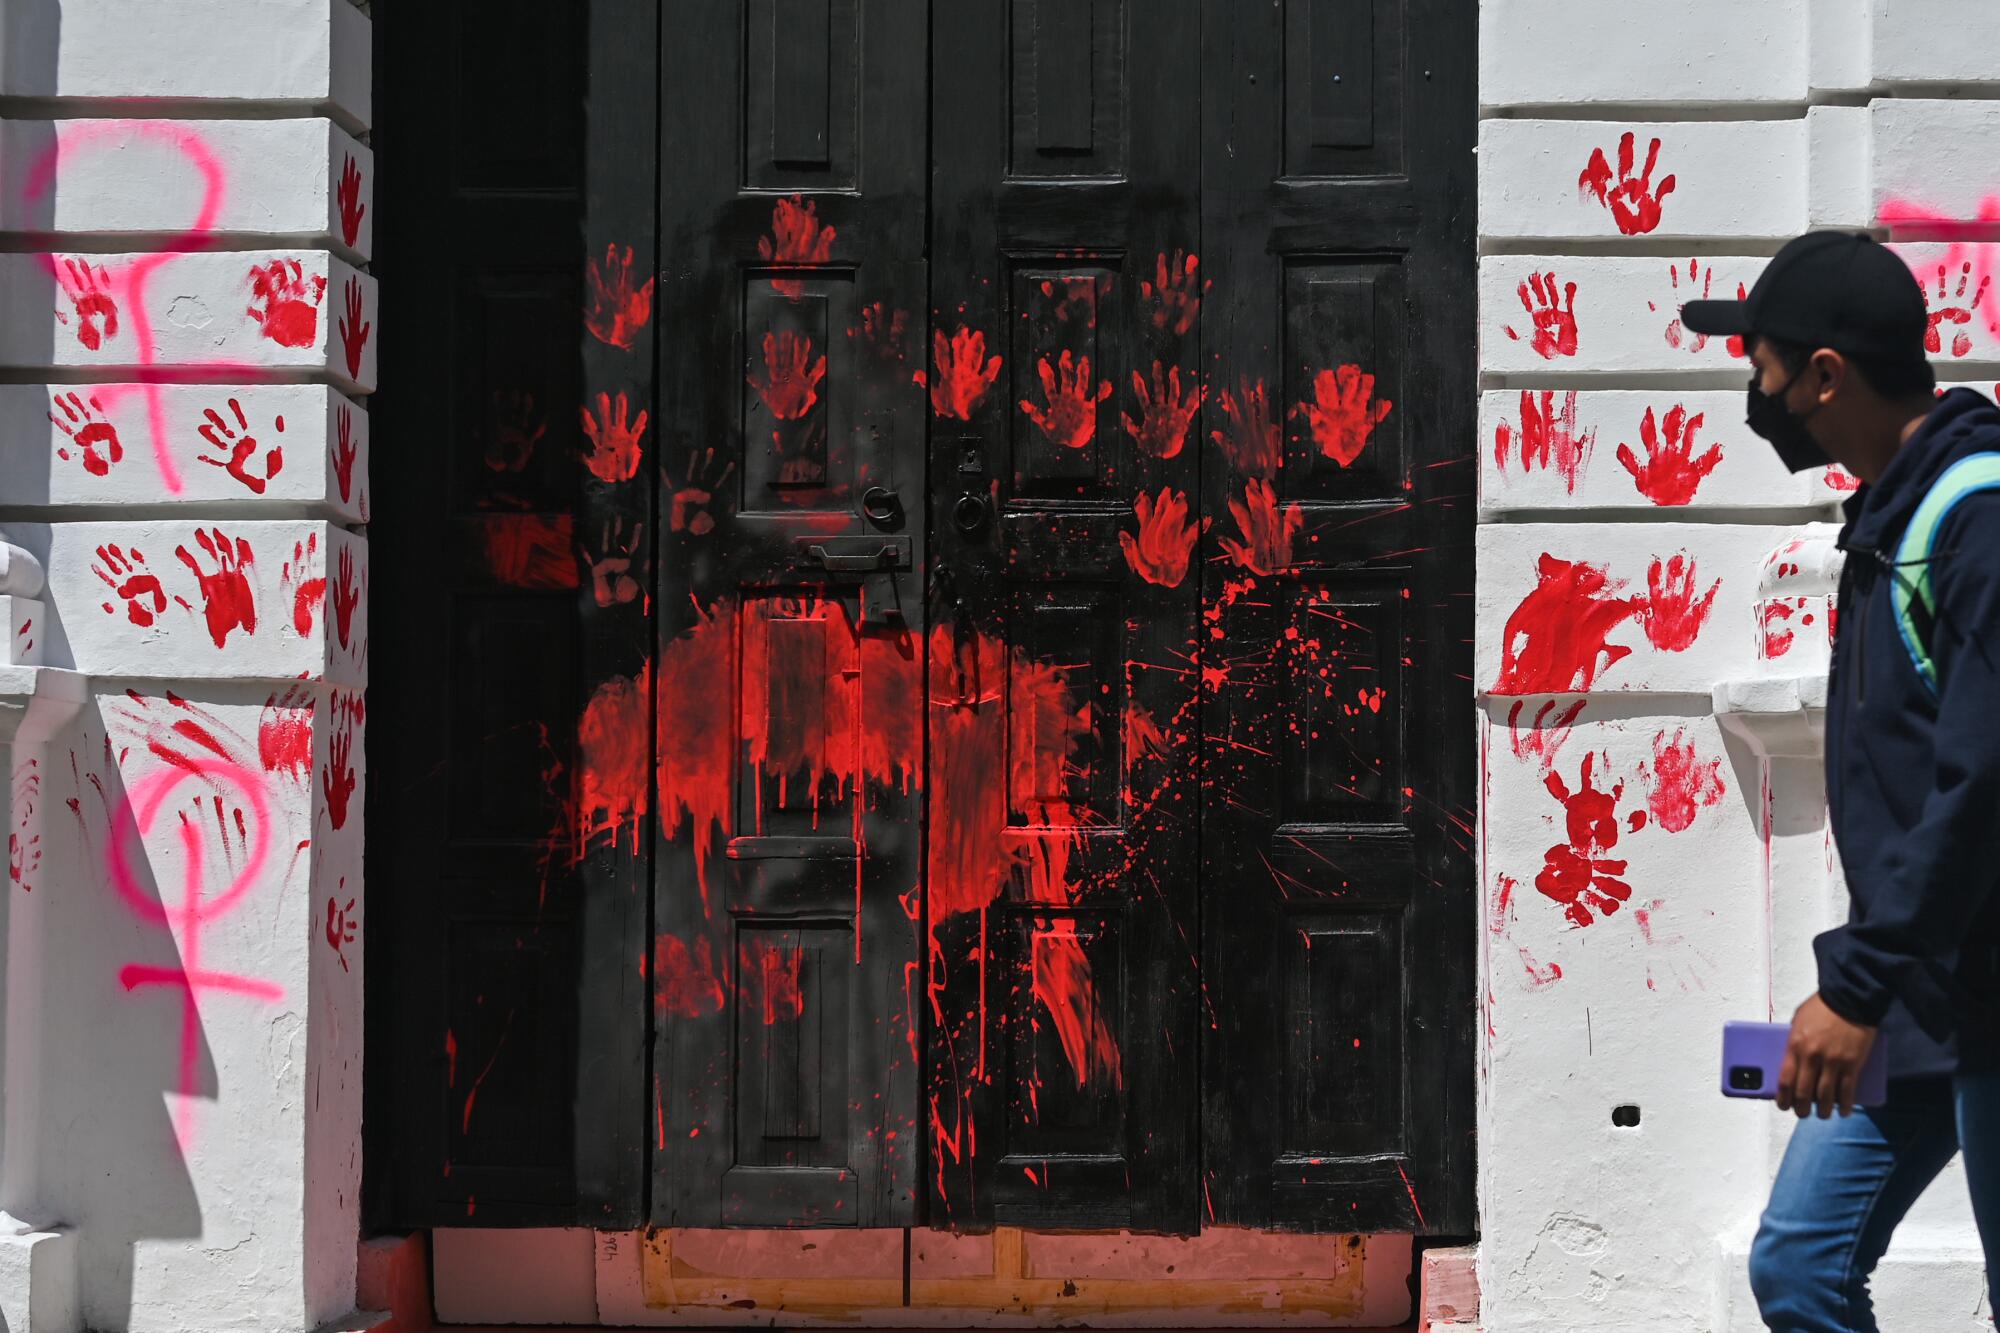 A man passes graffiti related to feminism and a vandalized front door